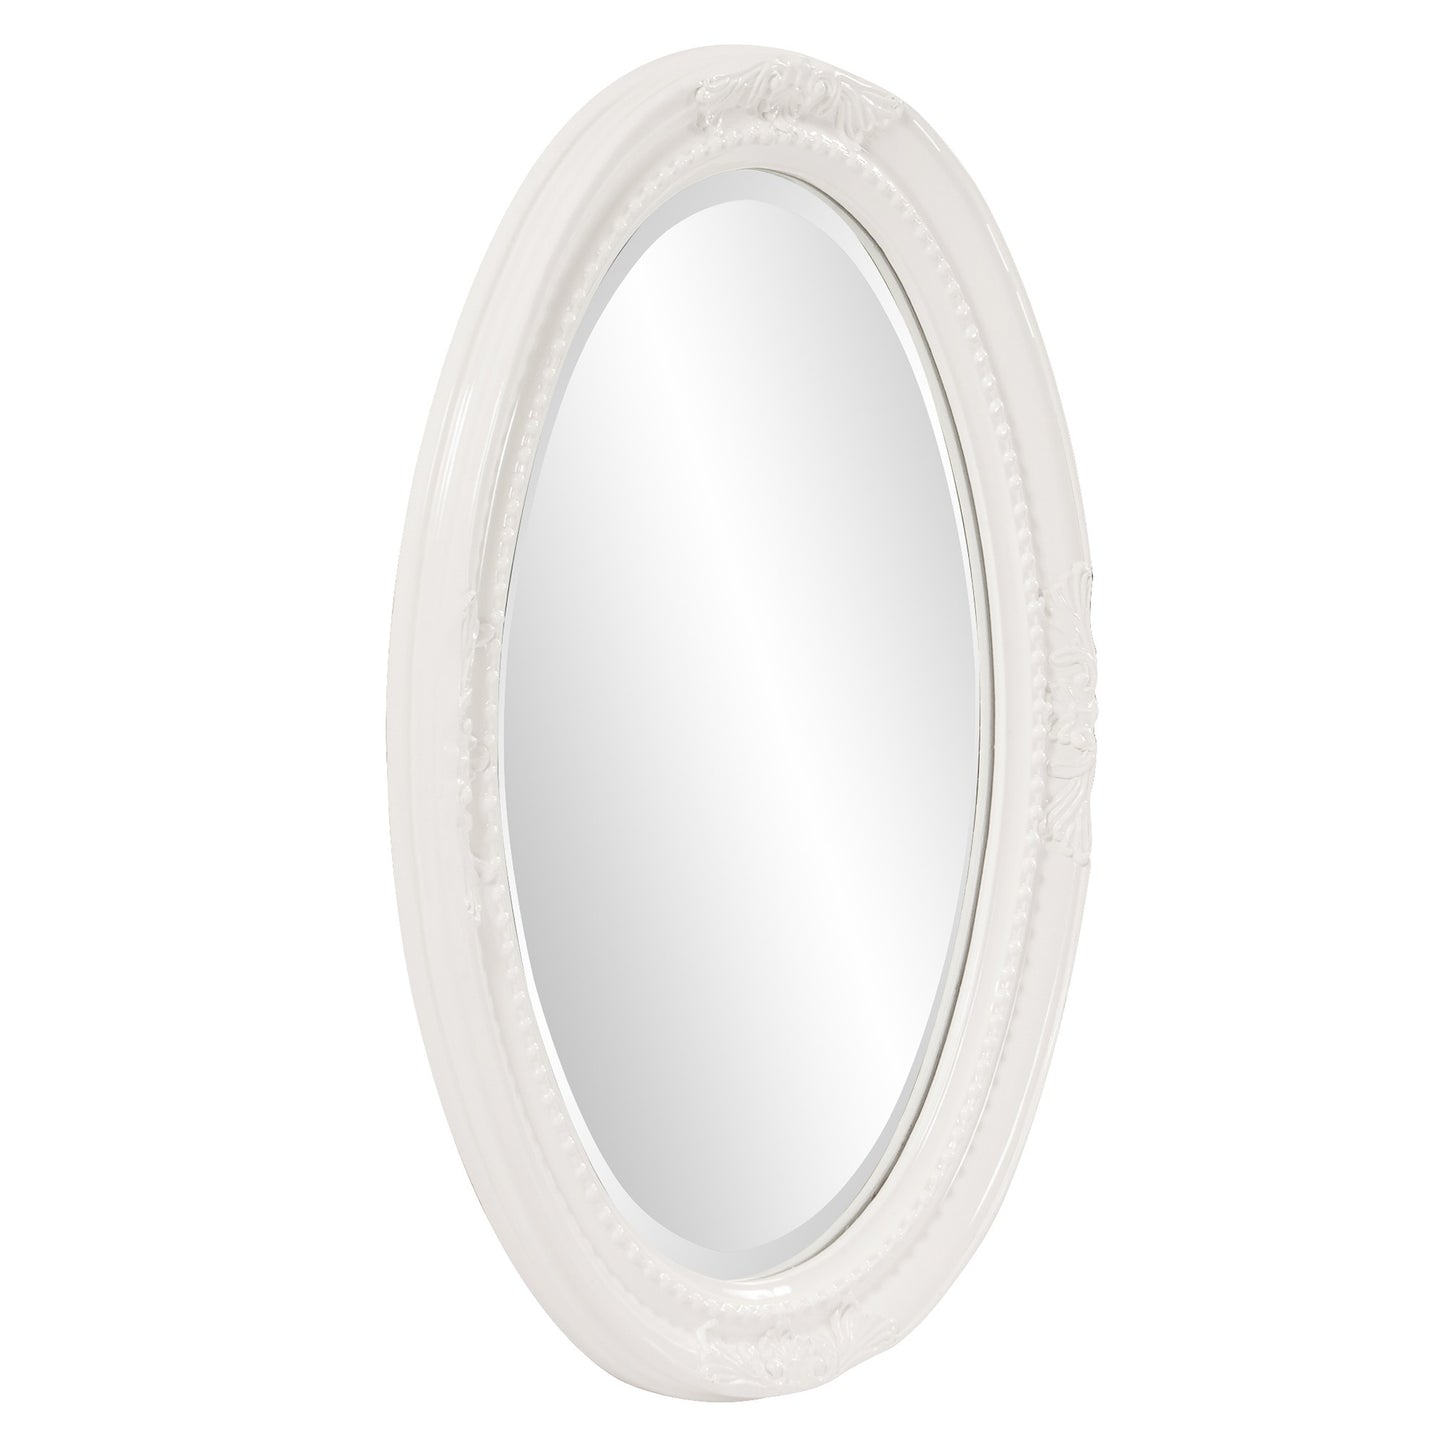 Oval Mirror In A Glossy White Wood Frame